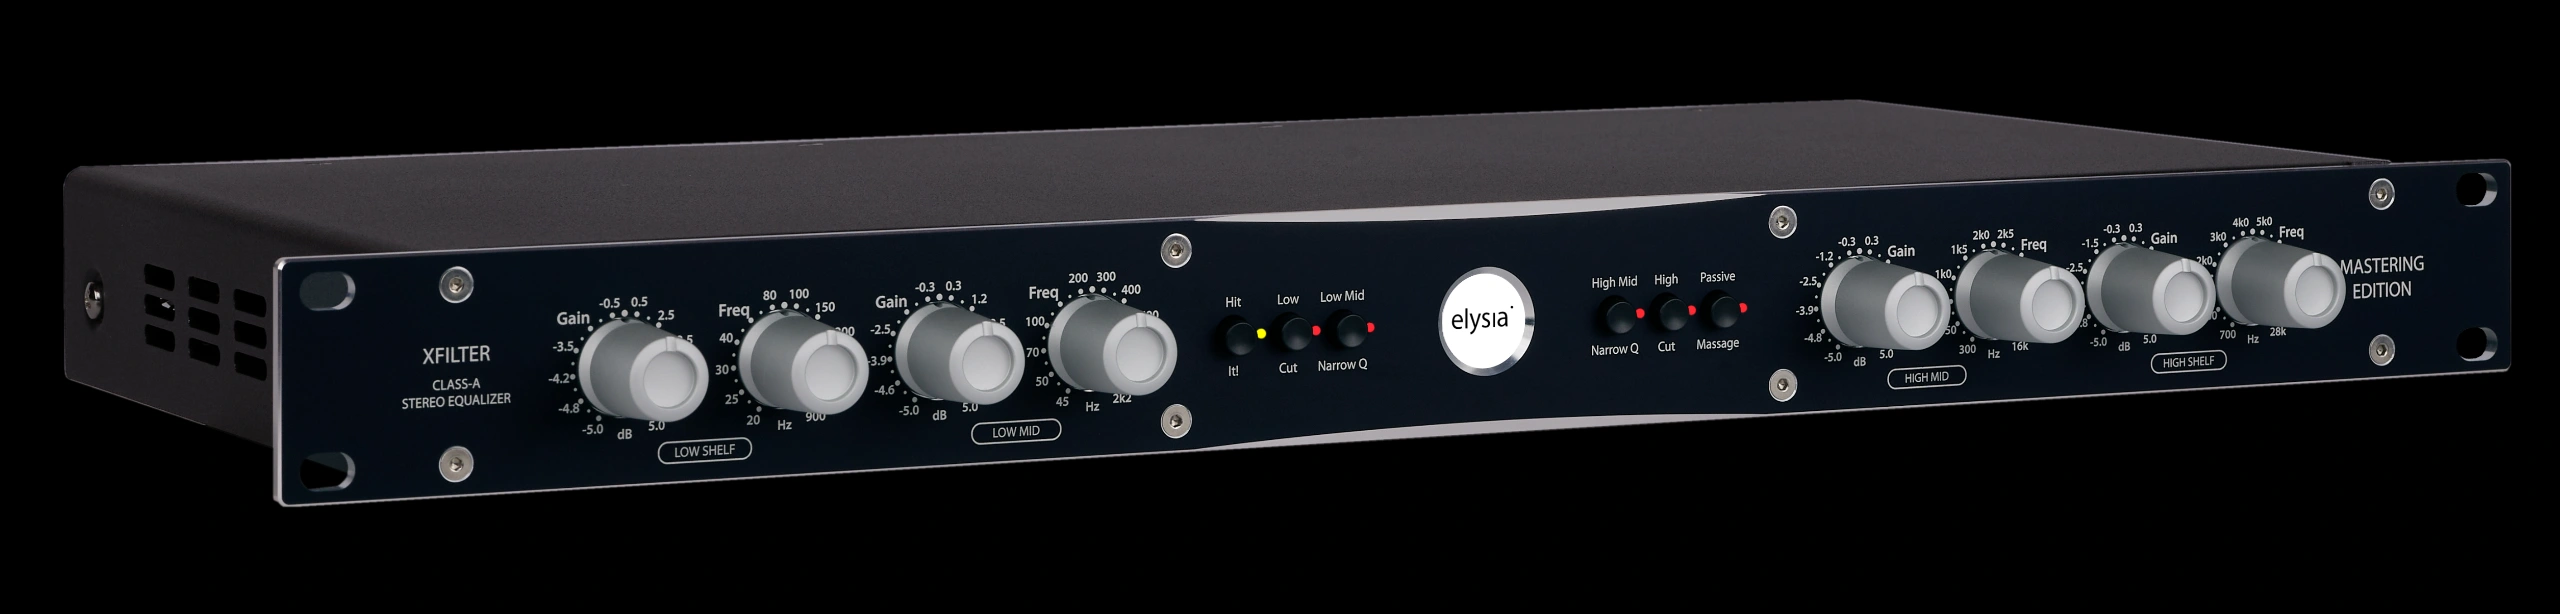 picture of the elysia xfilter mastering edition rack front with all controls and buttons.